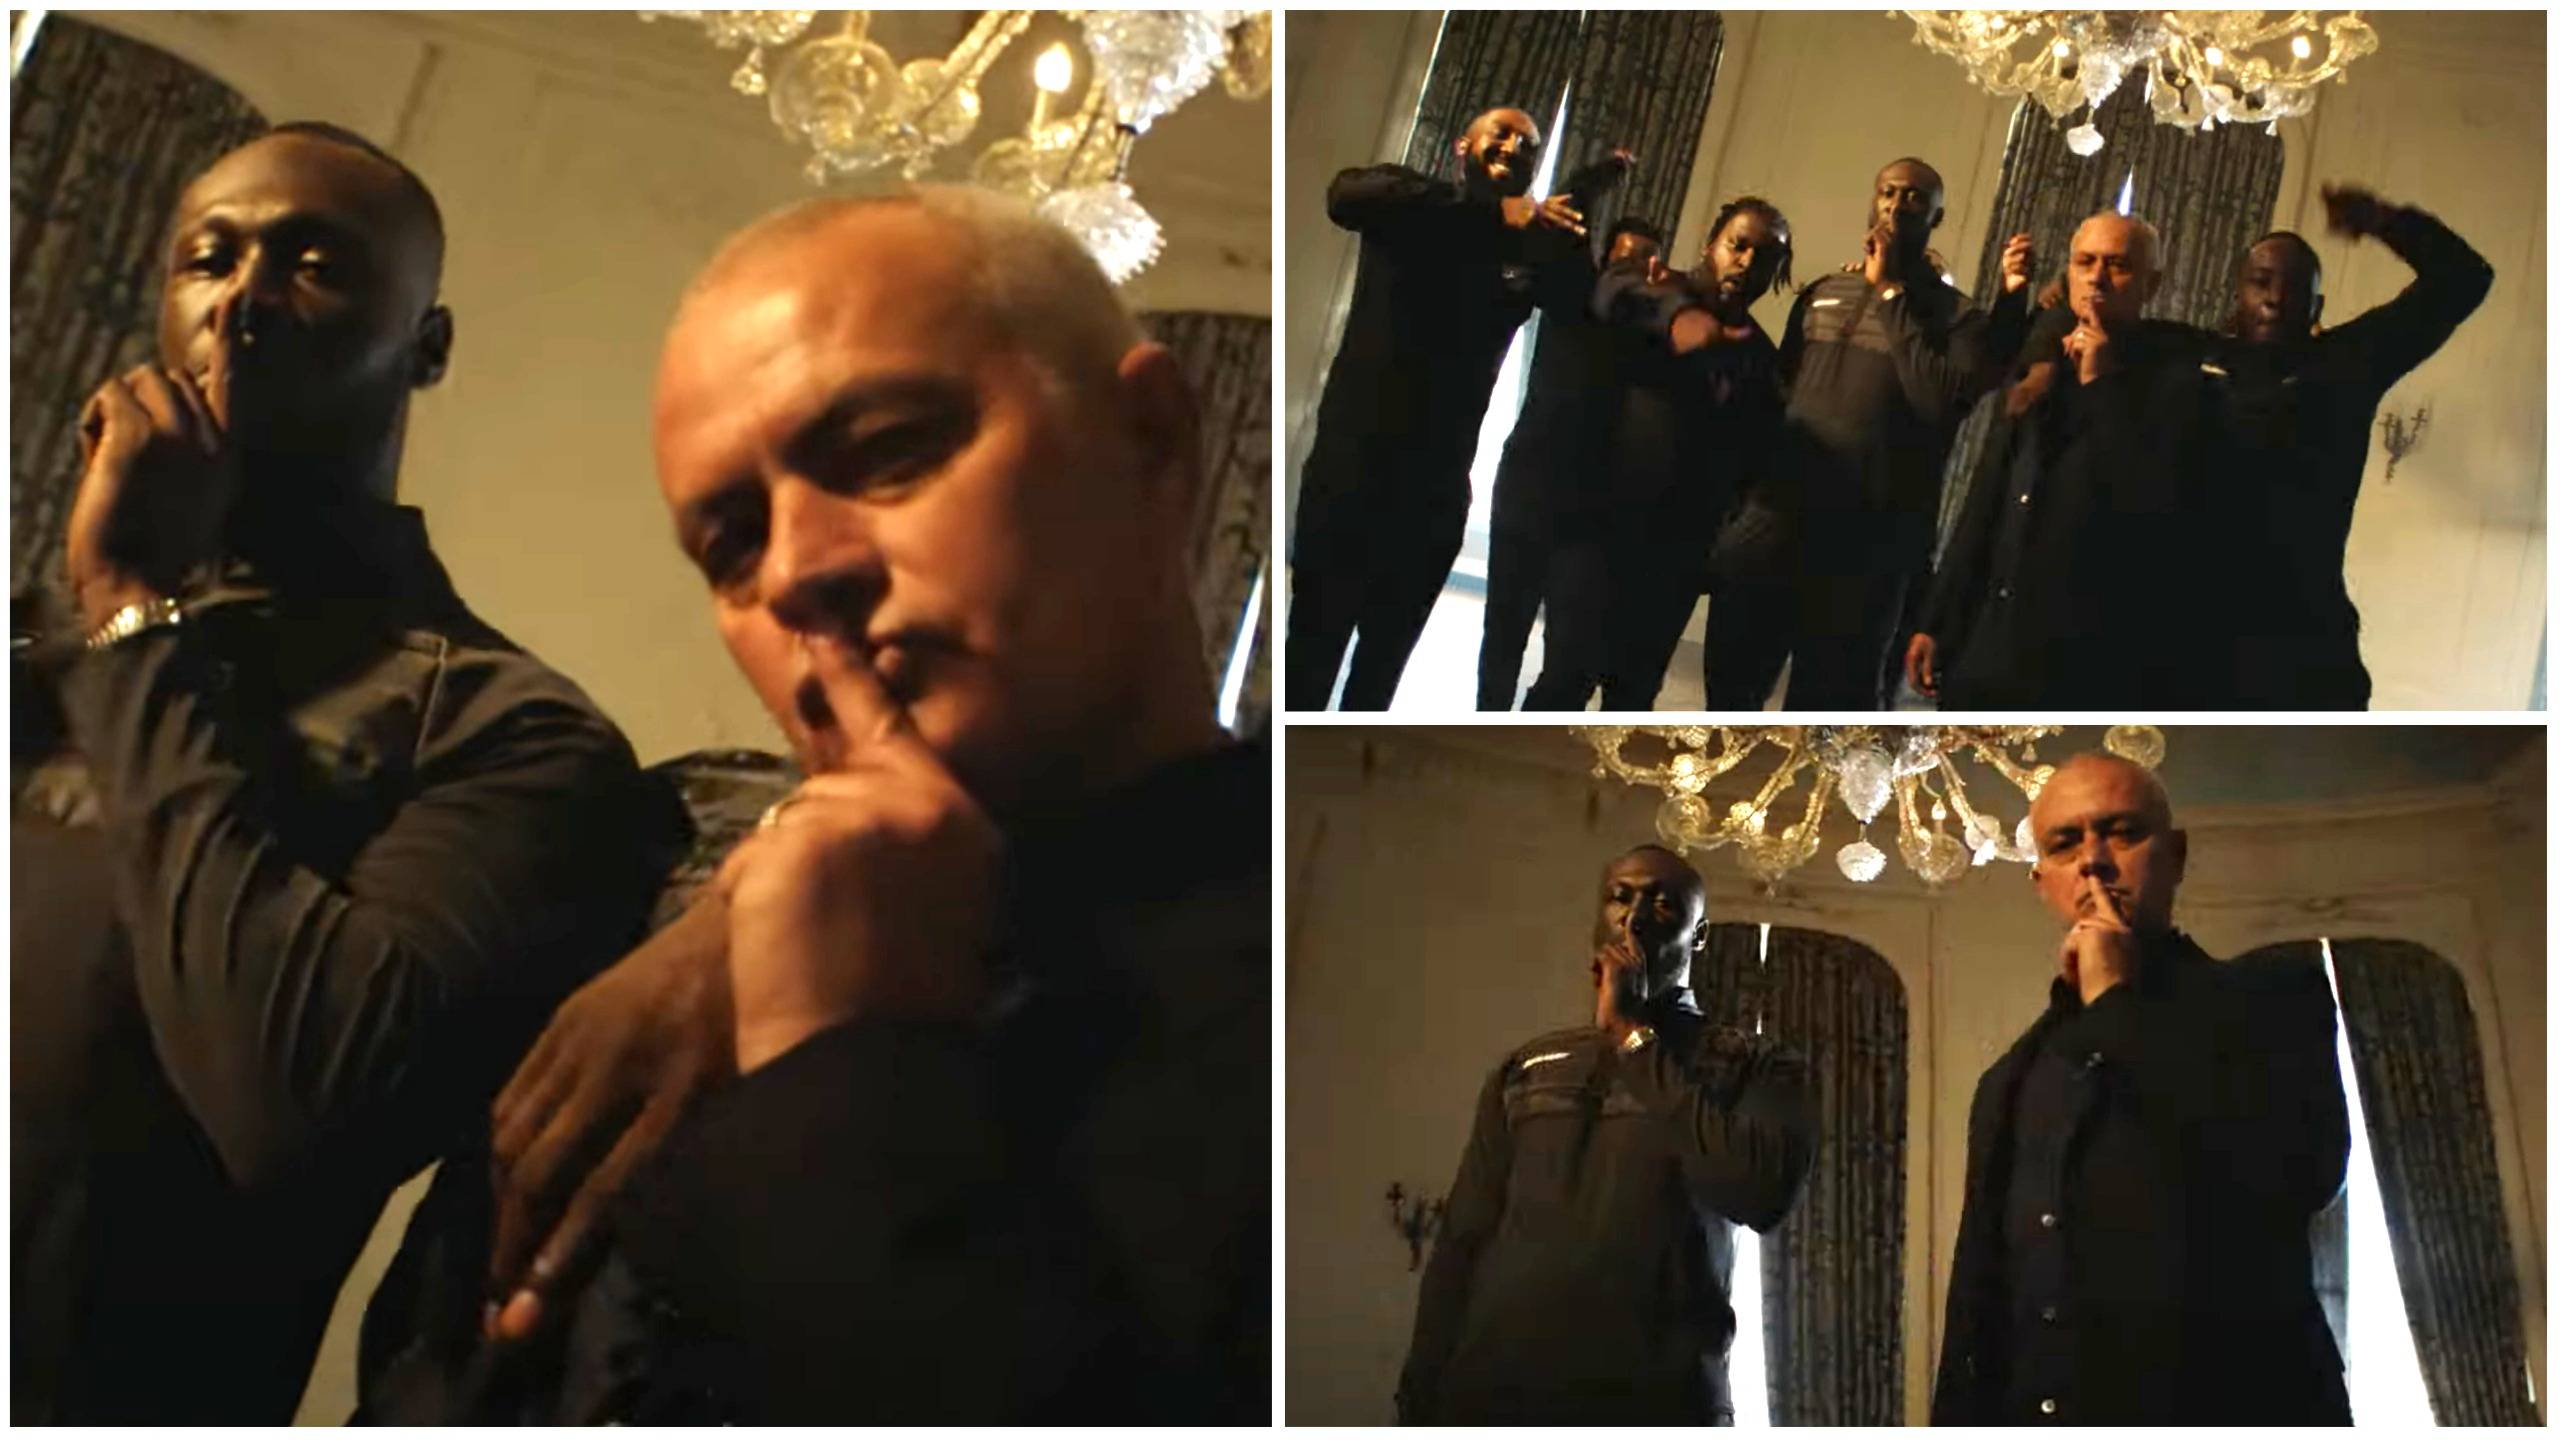 Jose Mourinho appears in Stormzy's new music video